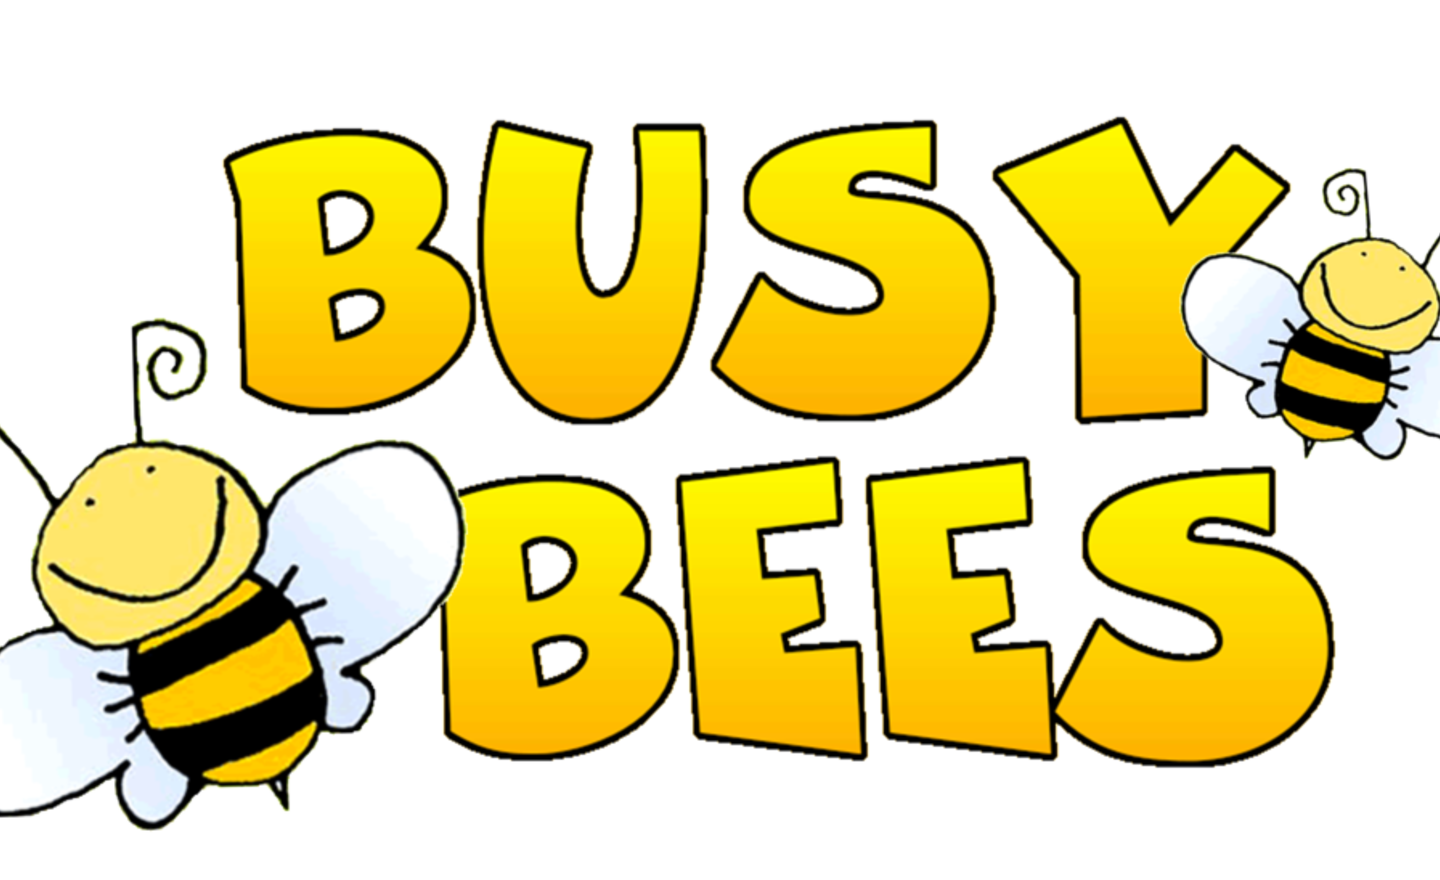 Image of Another Busy Bee